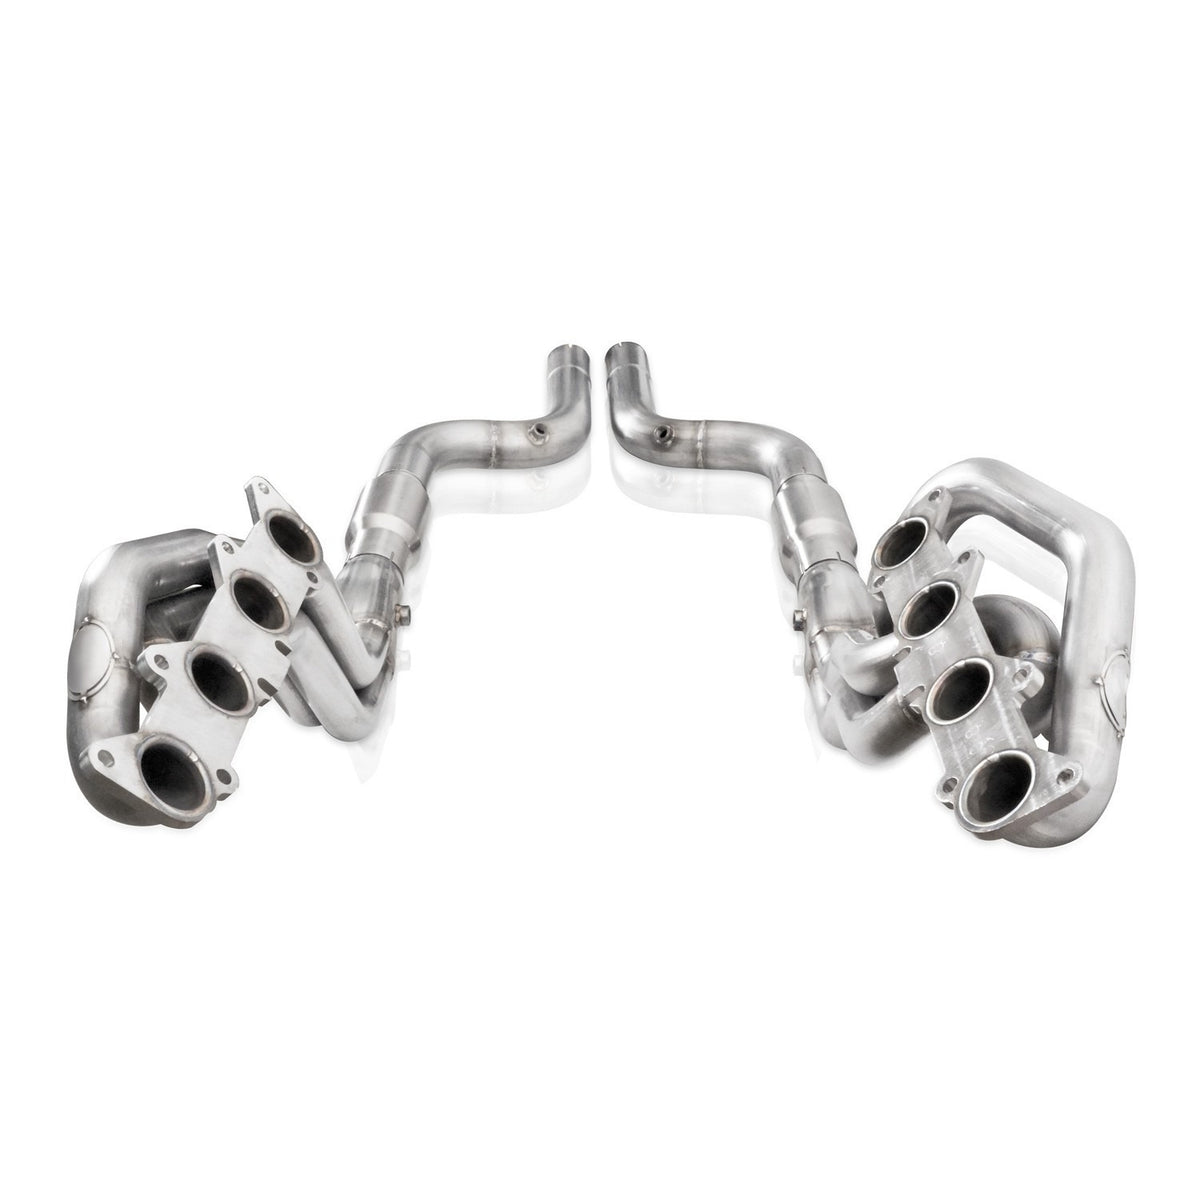 STAINLESS WORKS Mustang GT 5.0L 2015-2020 Headers w/ Performance (SW) Connect &amp; Catalytic Converter (2015-2020 GT 5.0L ONLY)